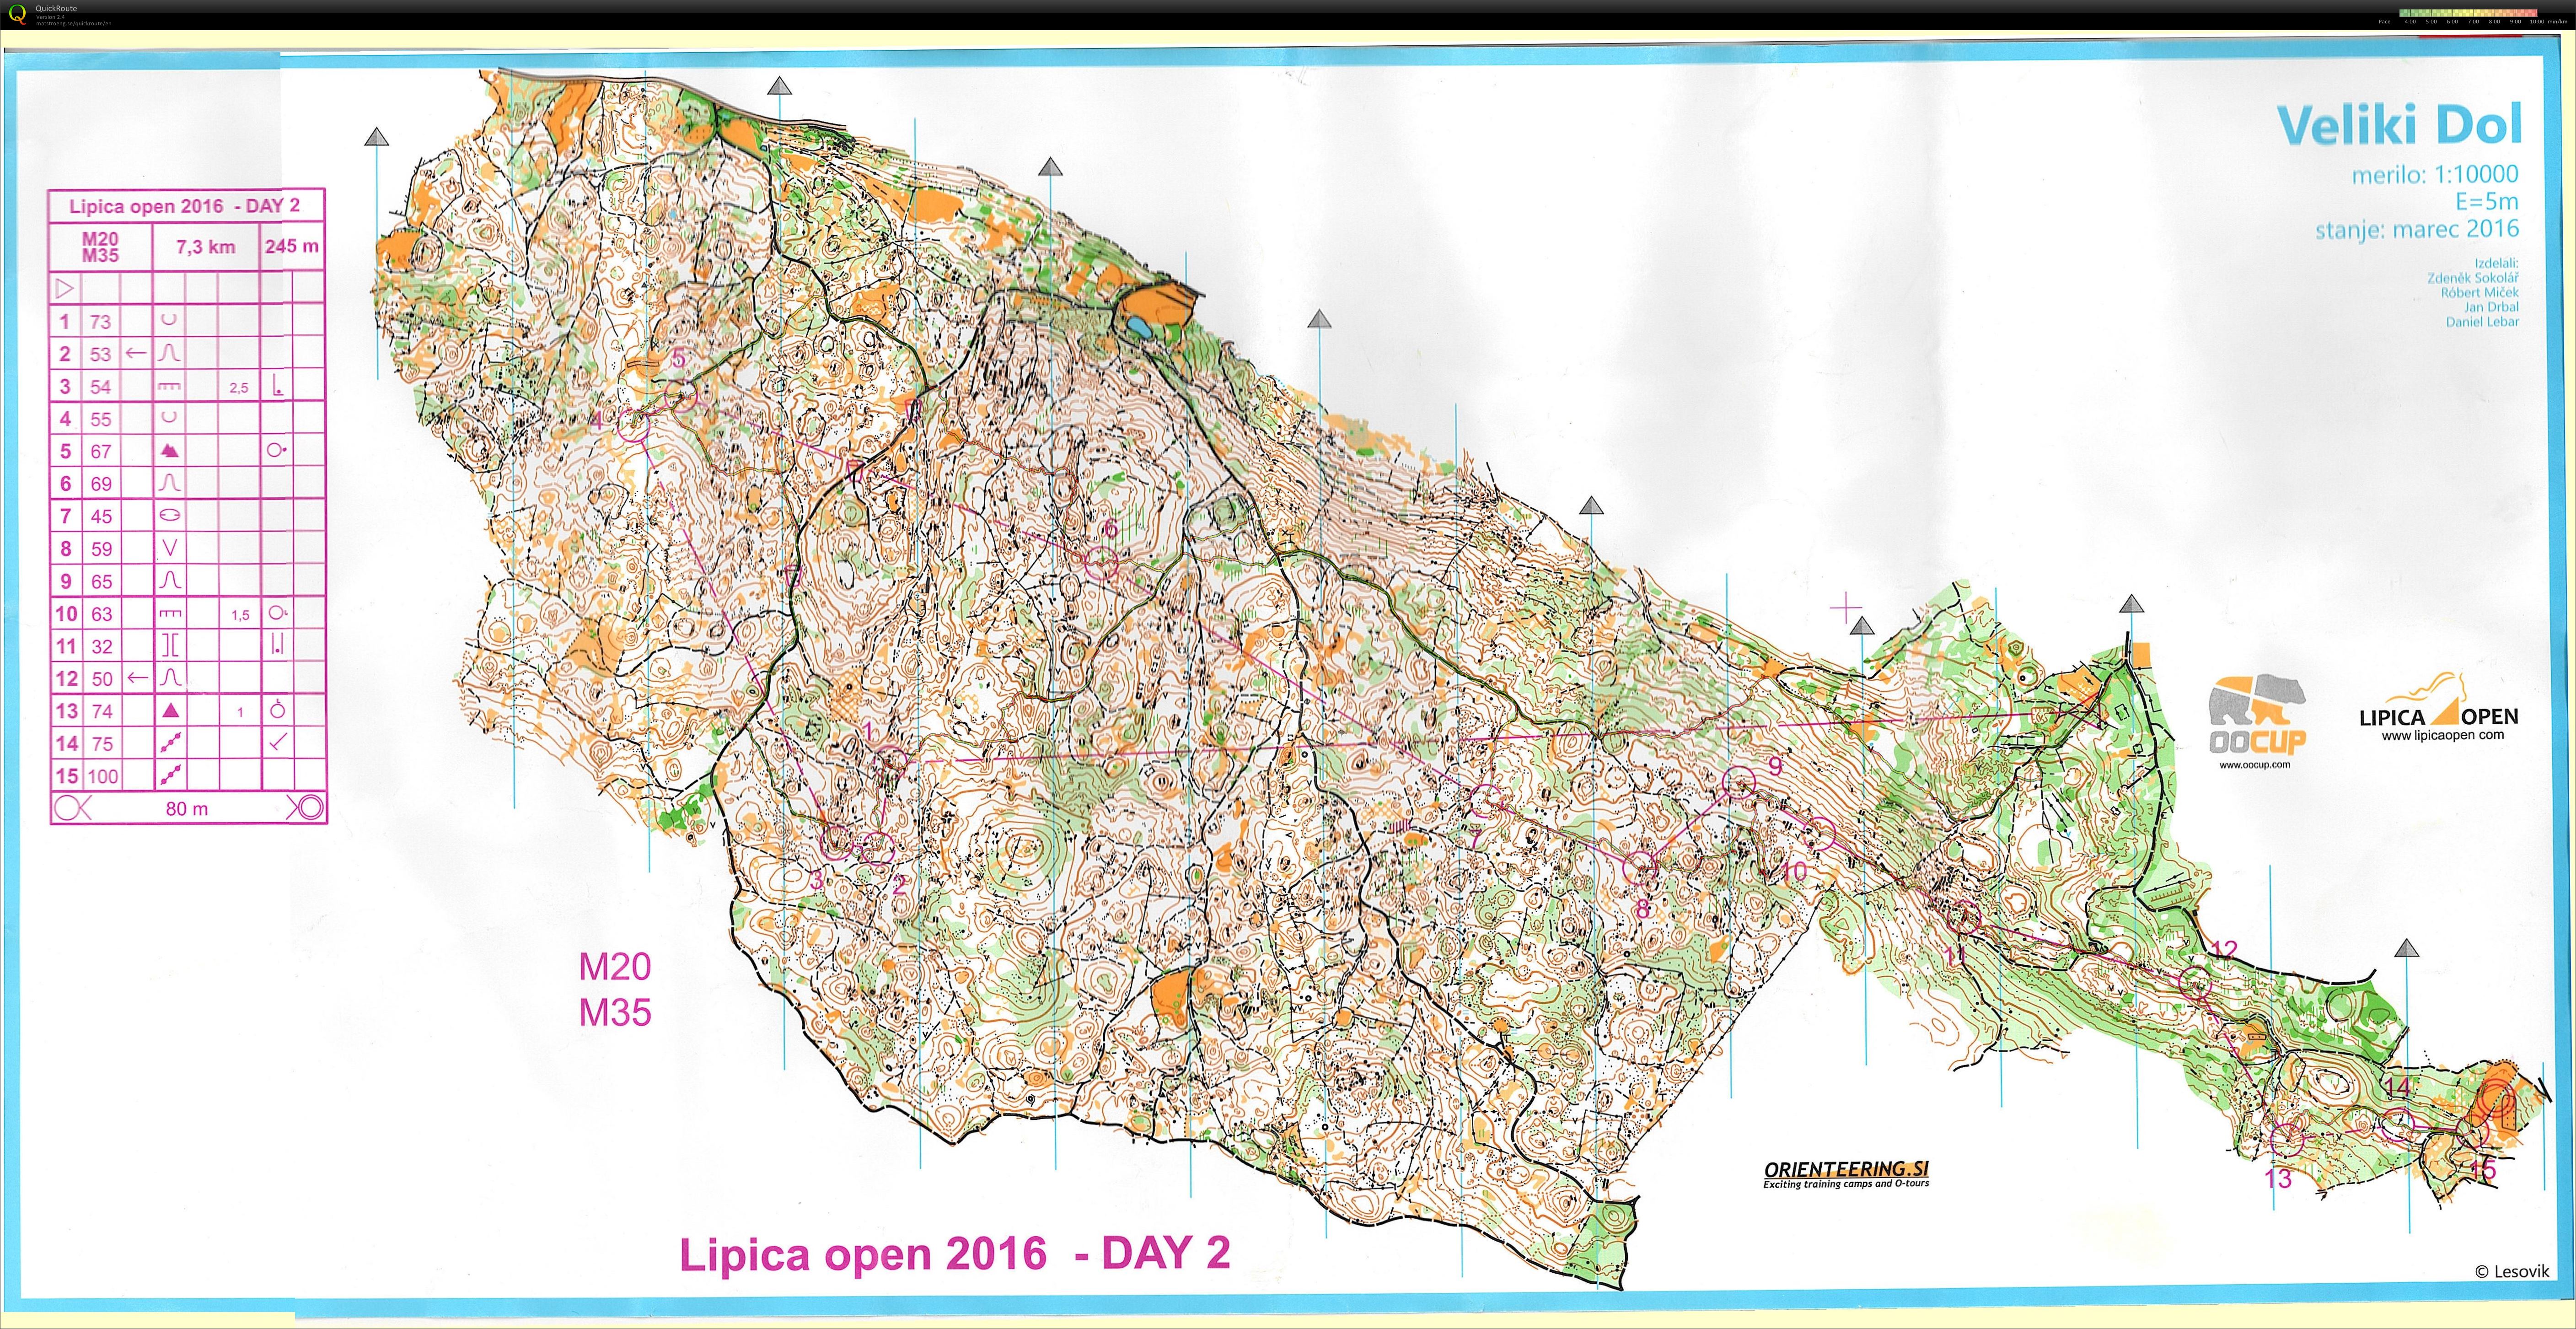 Lipica Open 2016 Day 2 (13.03.2016)